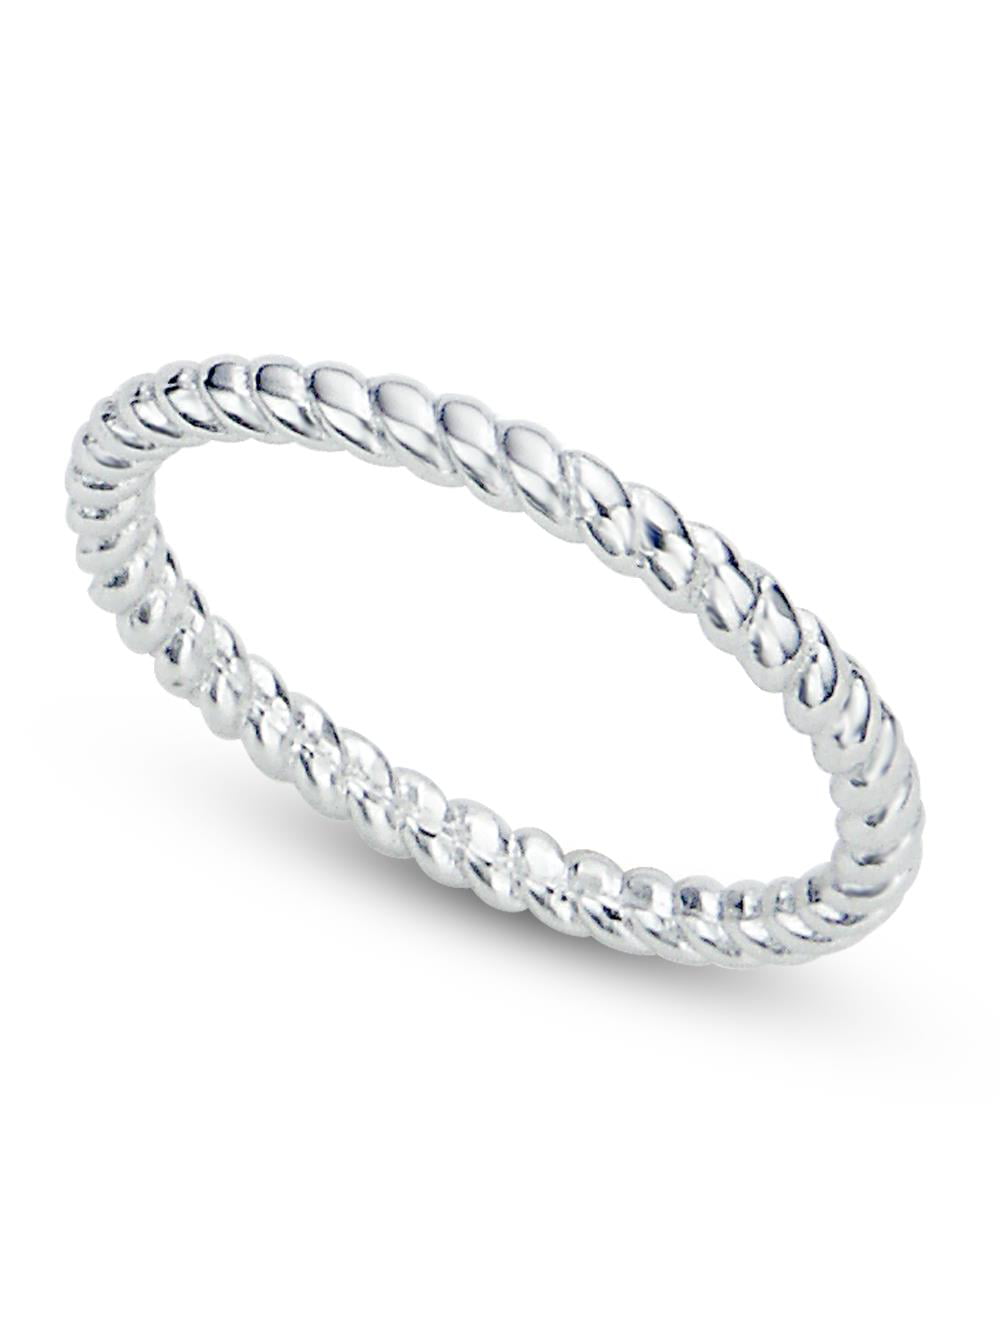 Andrea Jewelers - Sz 7 Sterling Silver 2MM Eternity Rope Wedding Band ...